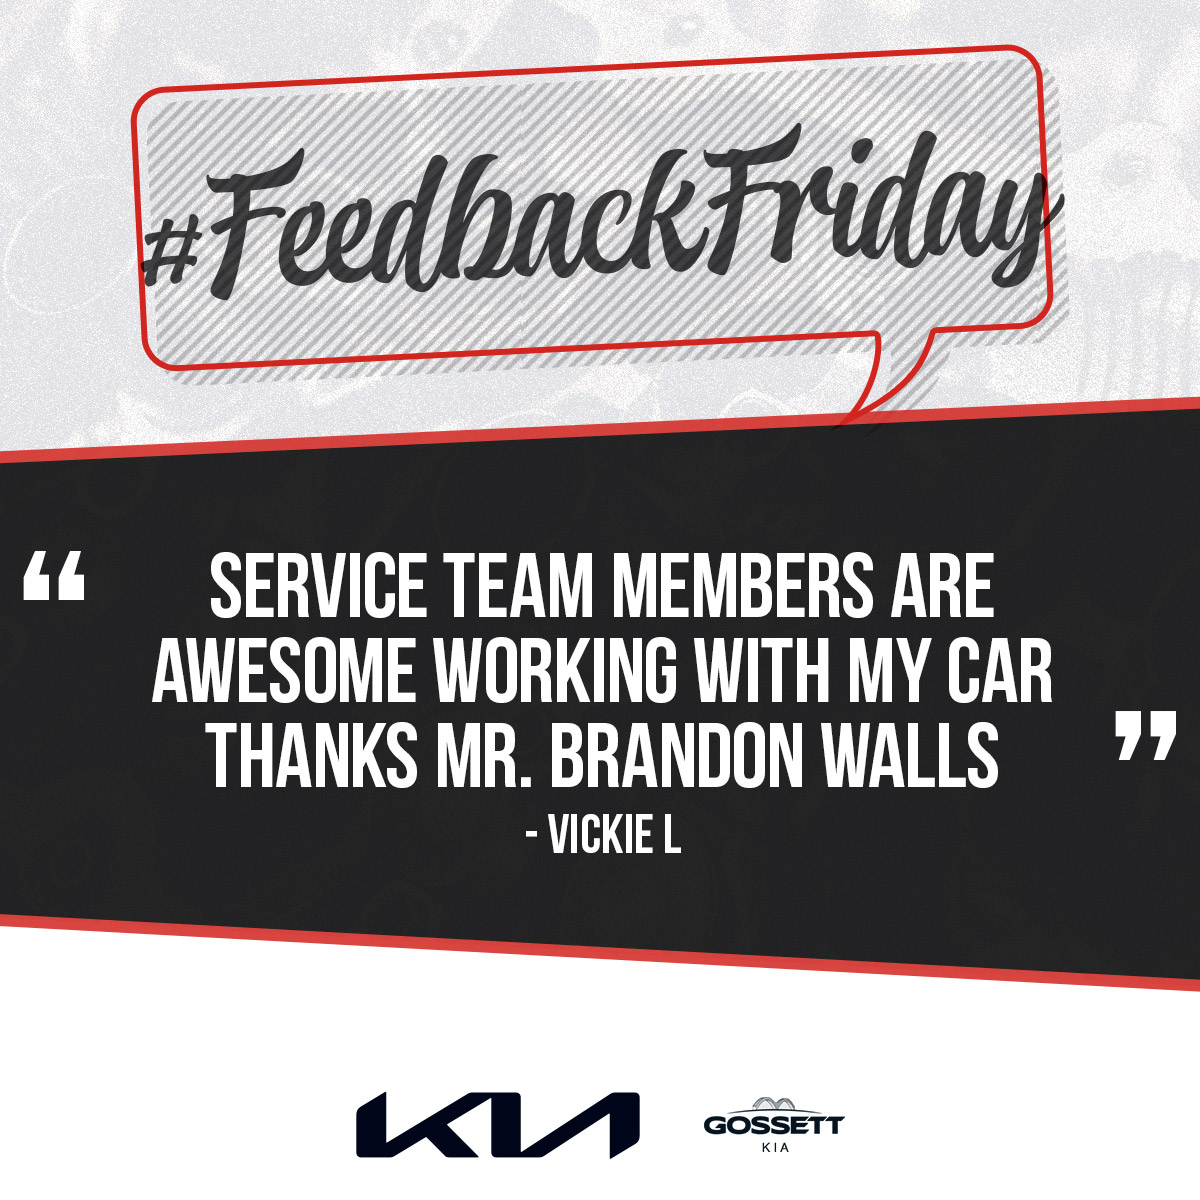 Great auto service is one of the many things we're happy to provide our valued customers at Gossett Kia! Our people really make the difference. #FeedbackFriday